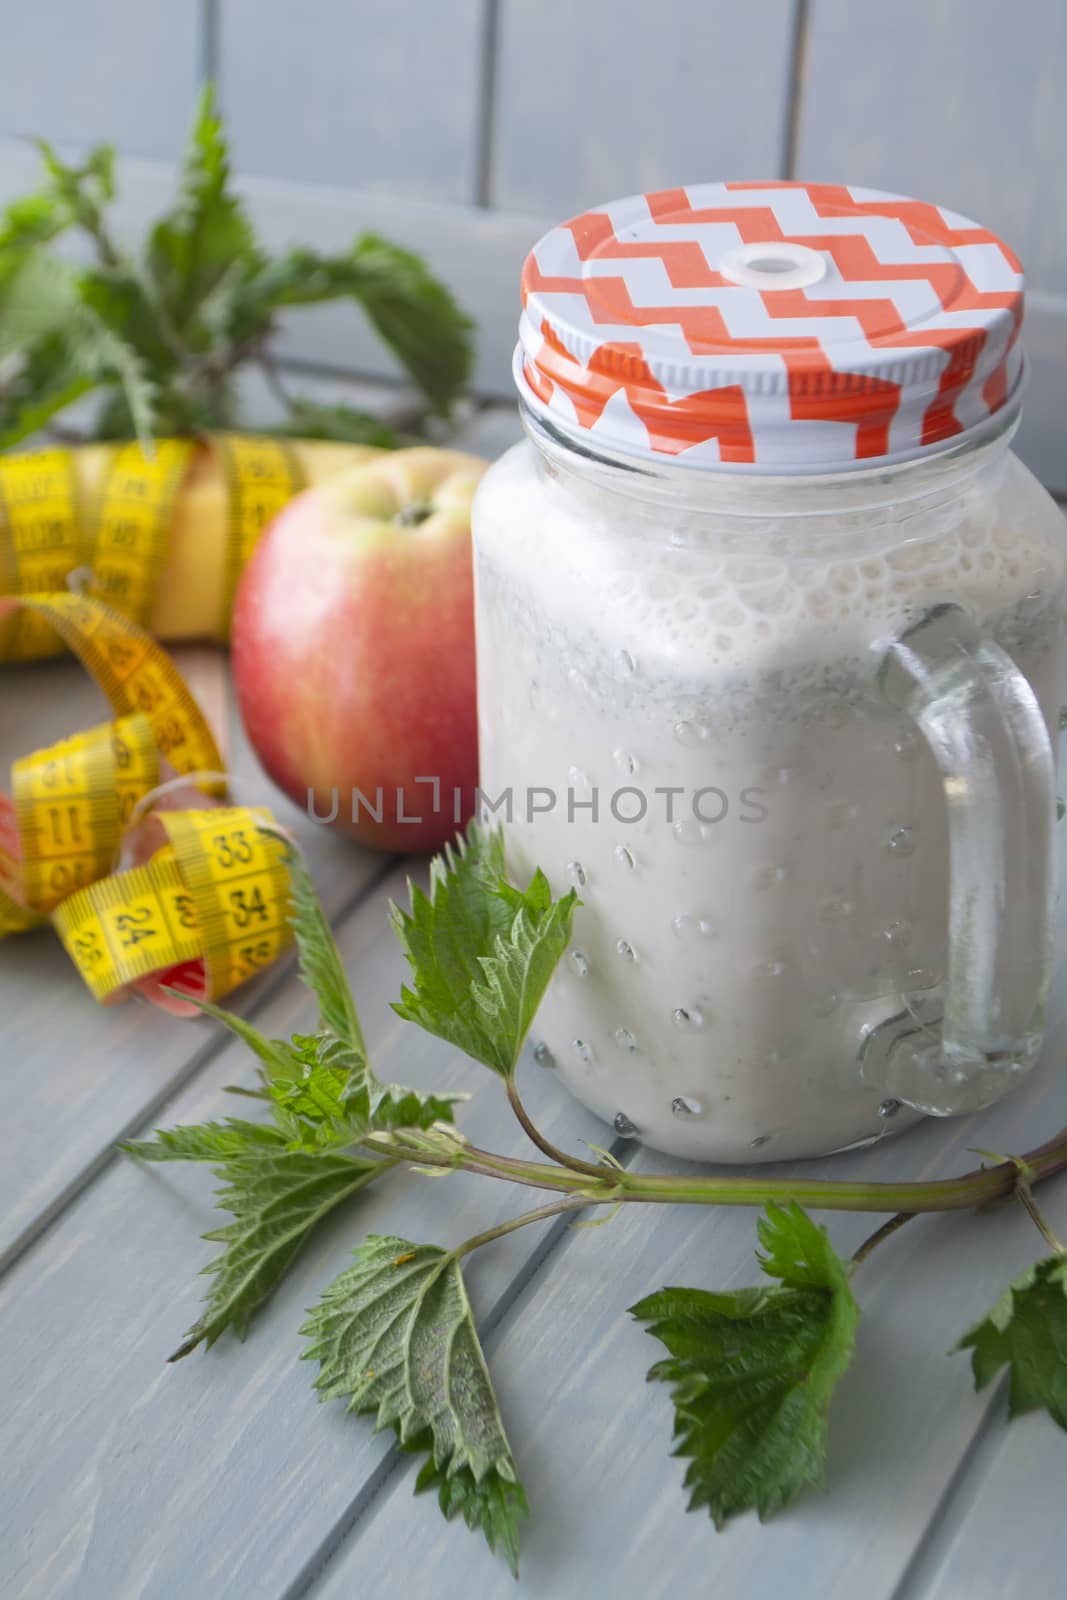 smoothie with apples, bananas, nettle. Organic diet, healthy lifestyle concept. Tape mesure. Vertical image